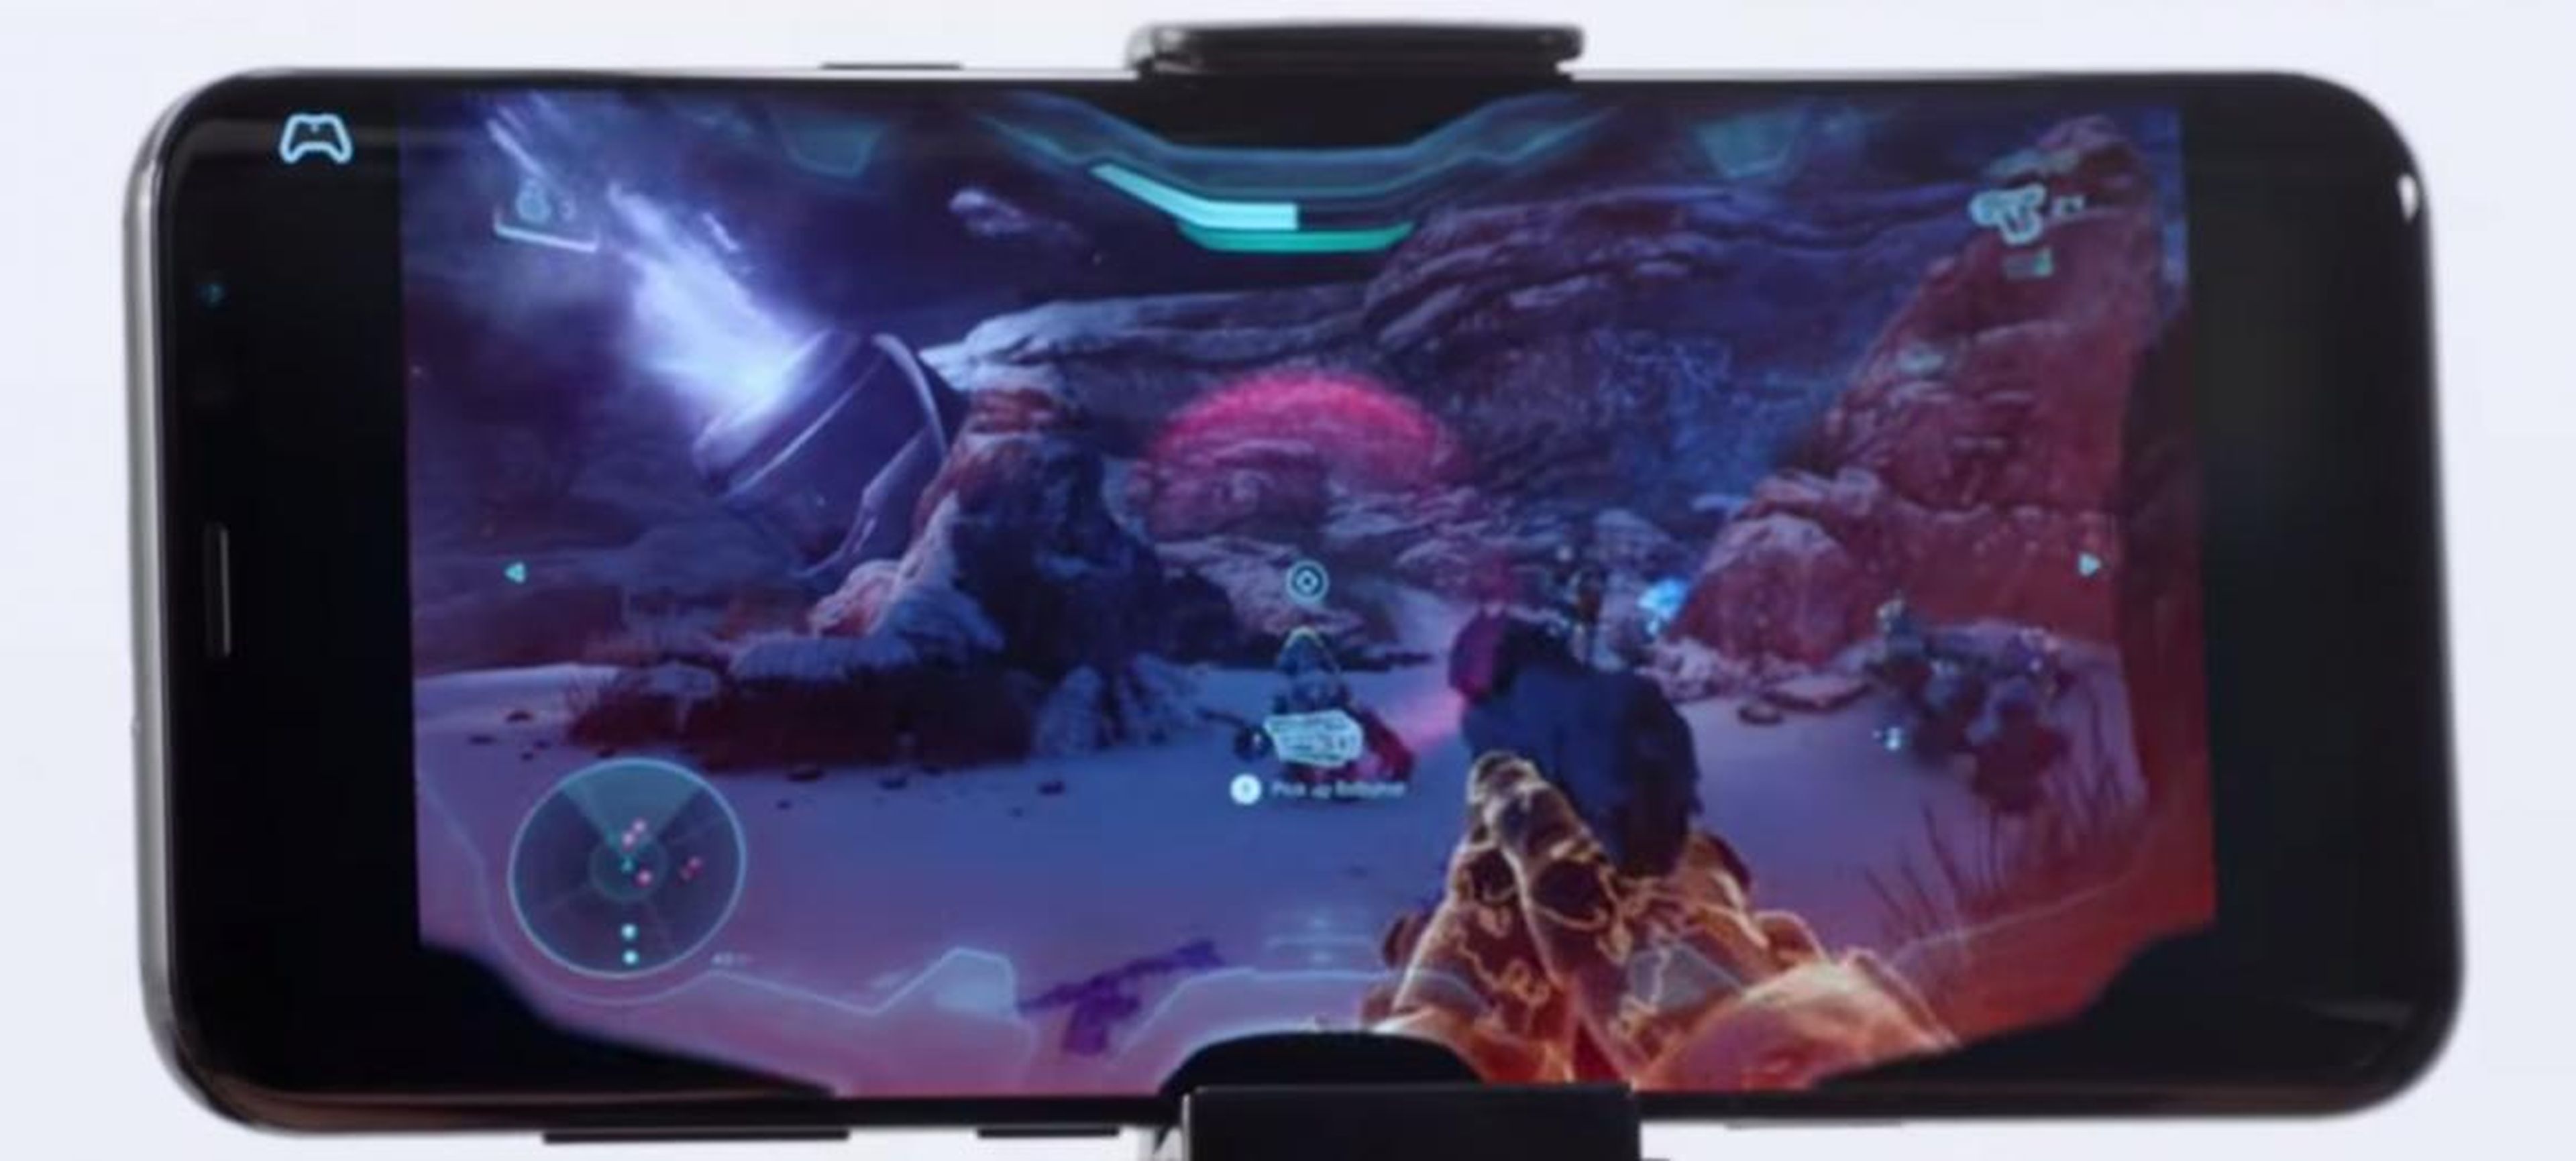 Microsoft's Project xCloud, running "Halo" on a smartphone.